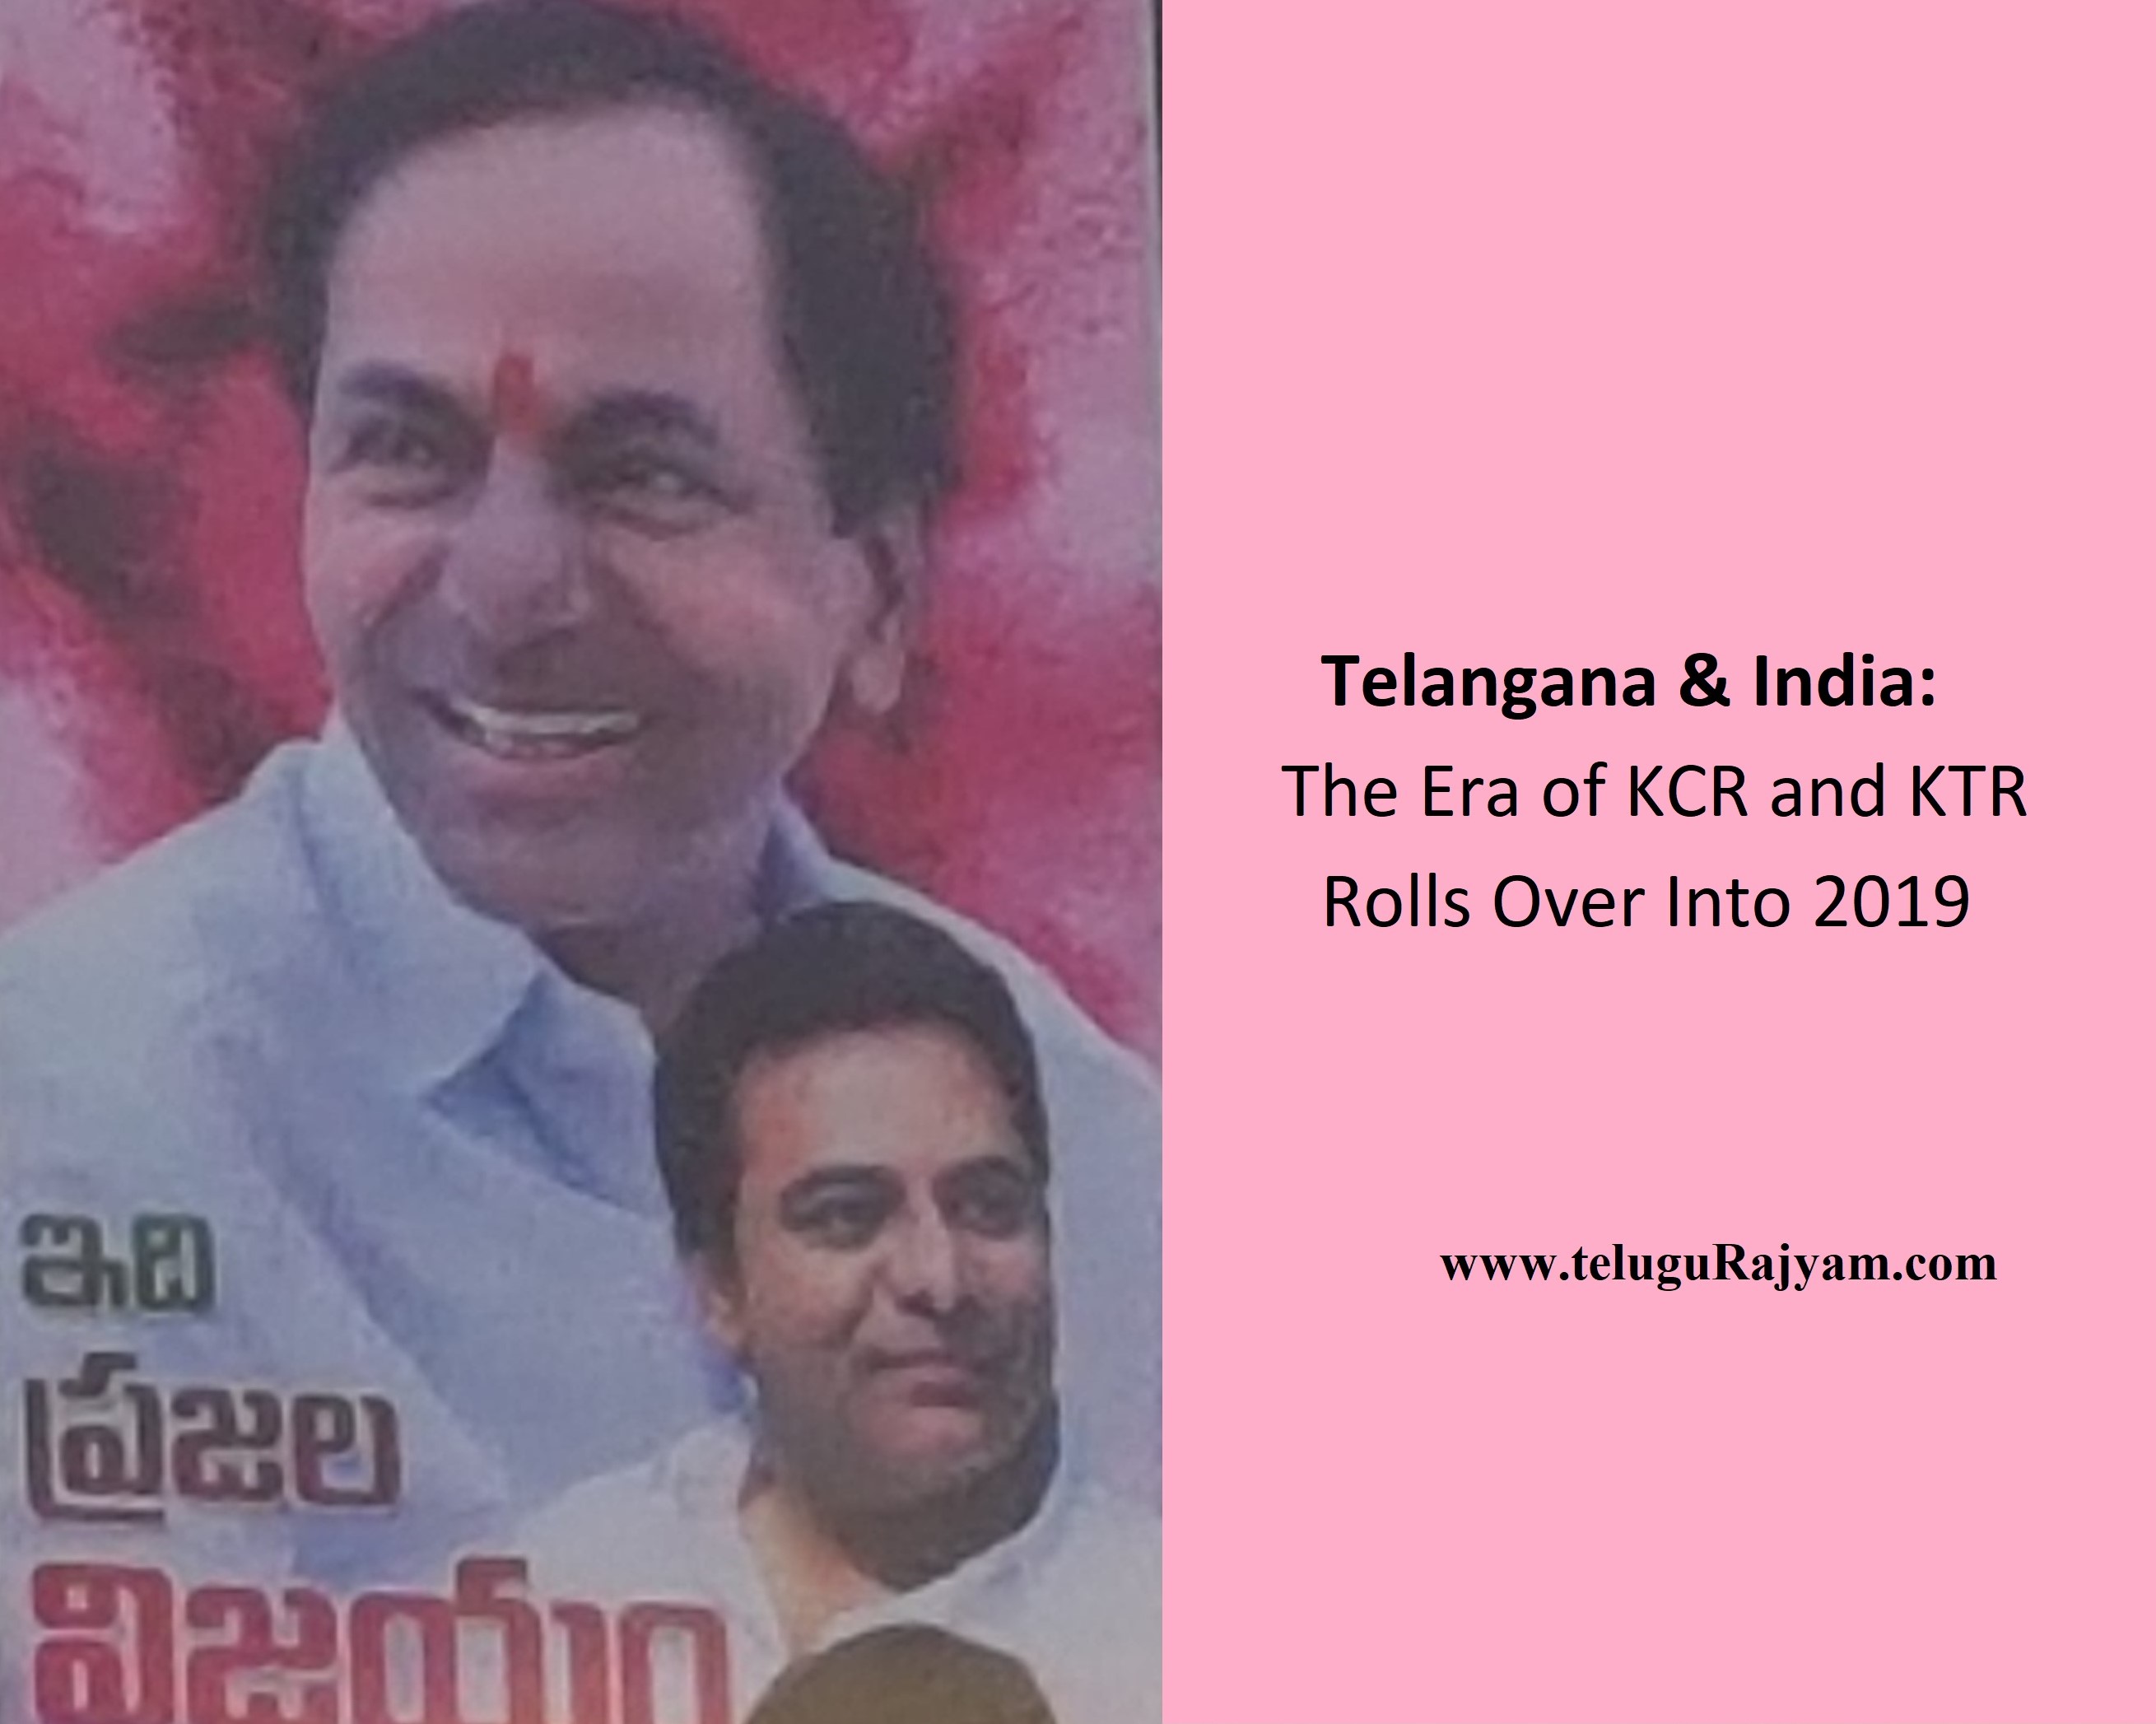 Telangana & India: The Era of KCR and KTR Rolls Over Into 2019